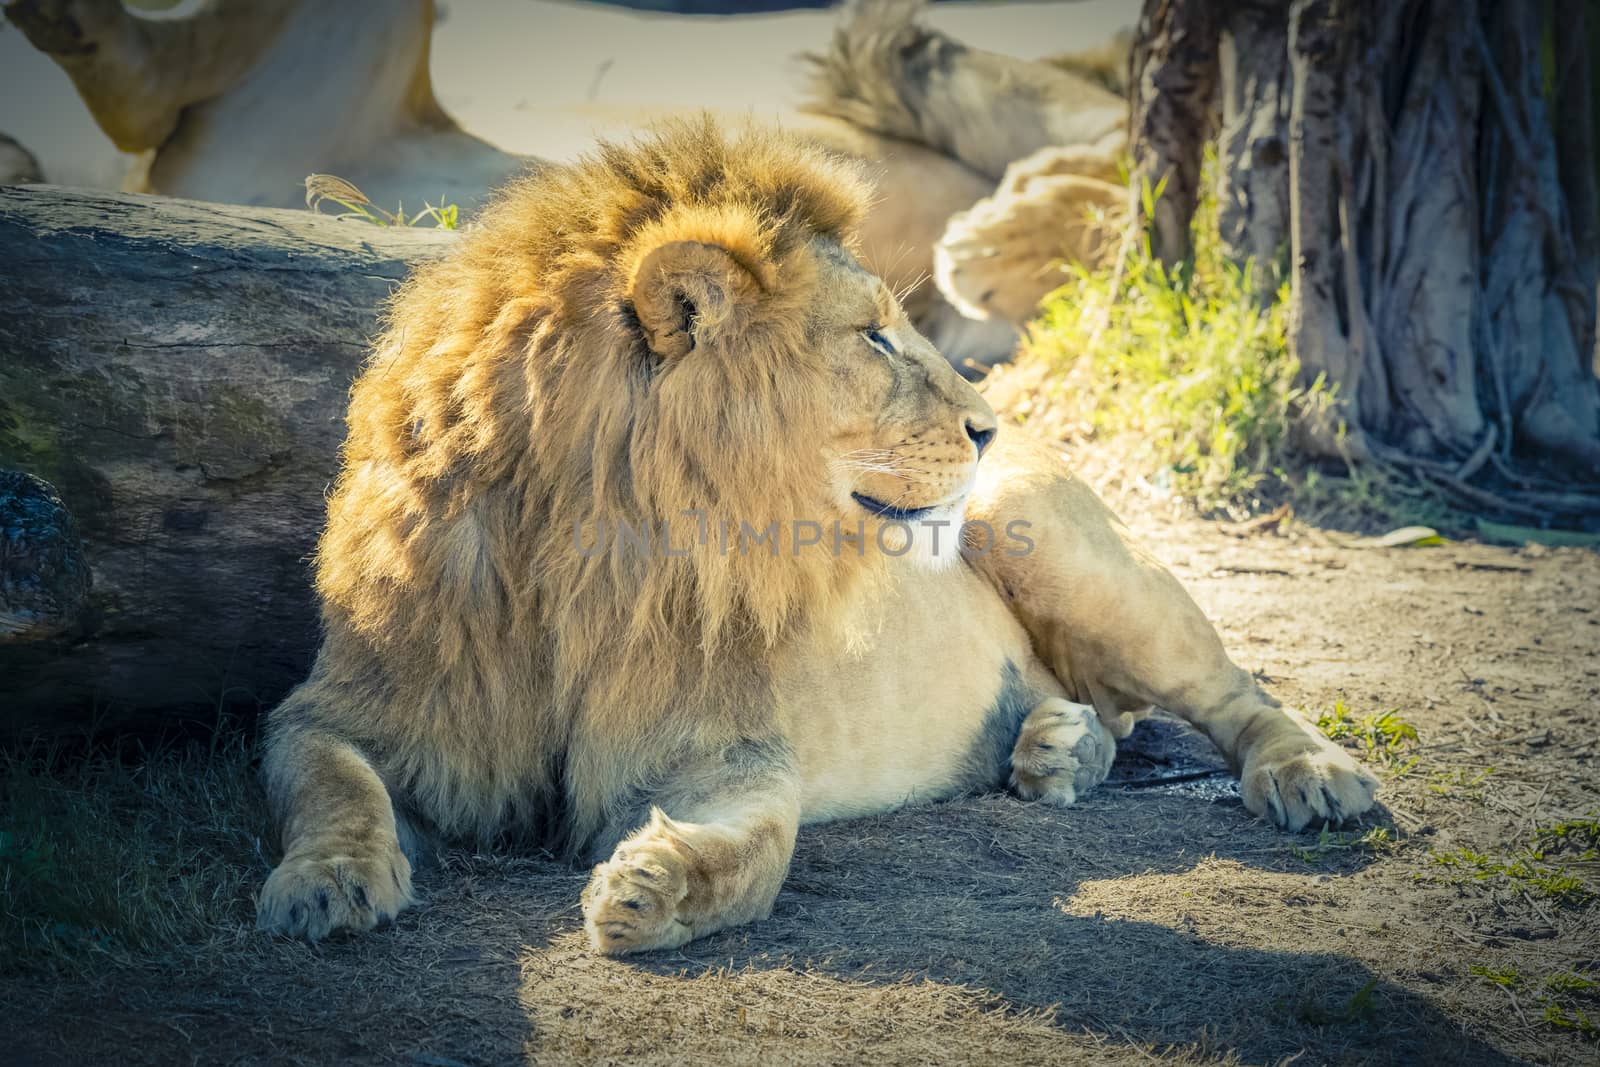 A male Lion relaxing in the sunshine by WittkePhotos